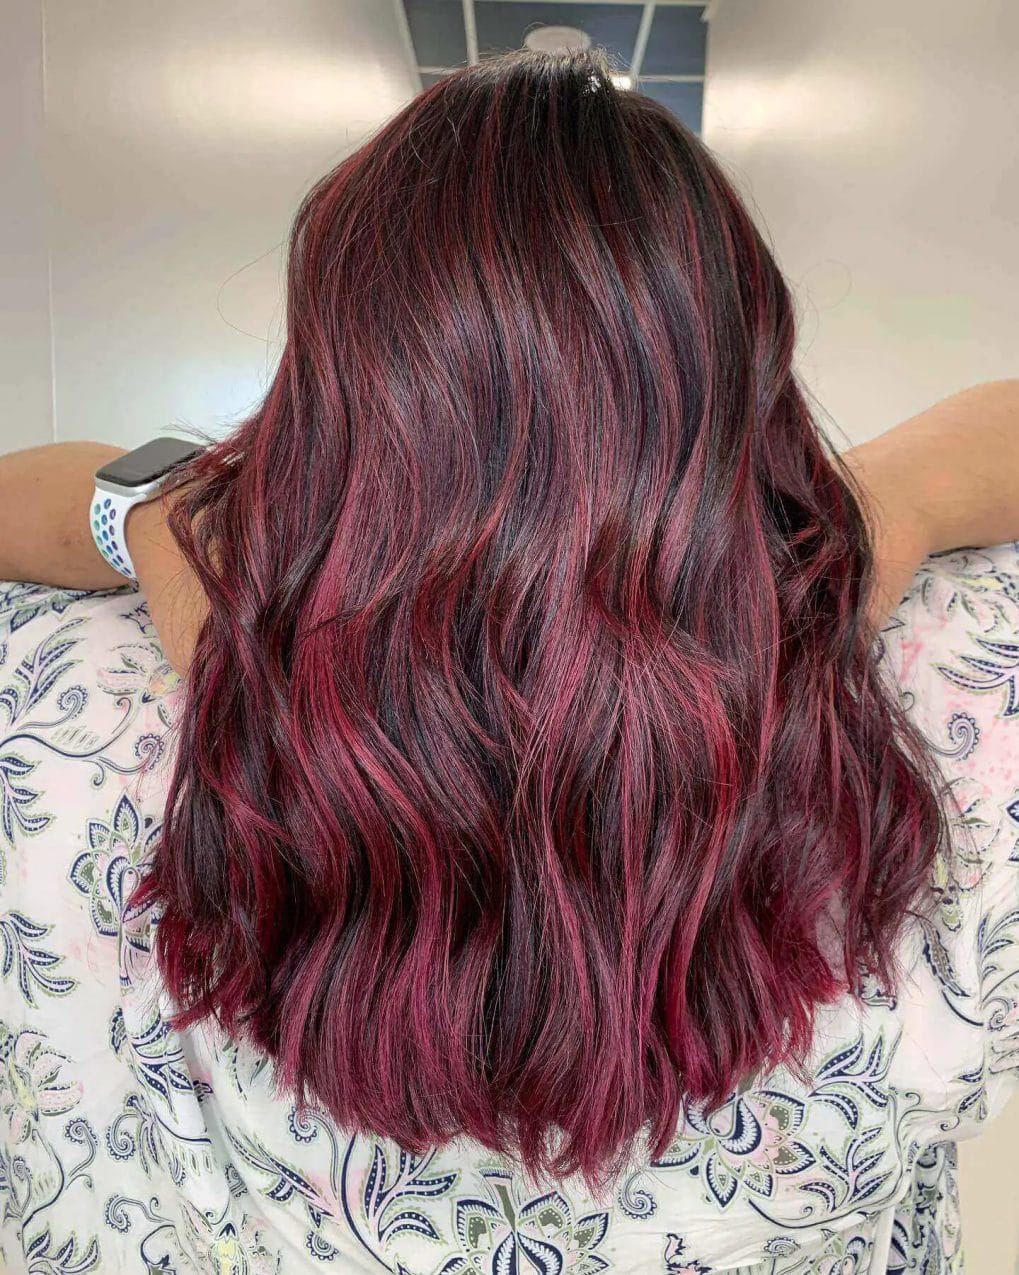 Rich red balayage on mid-back length hair, bold gradient.